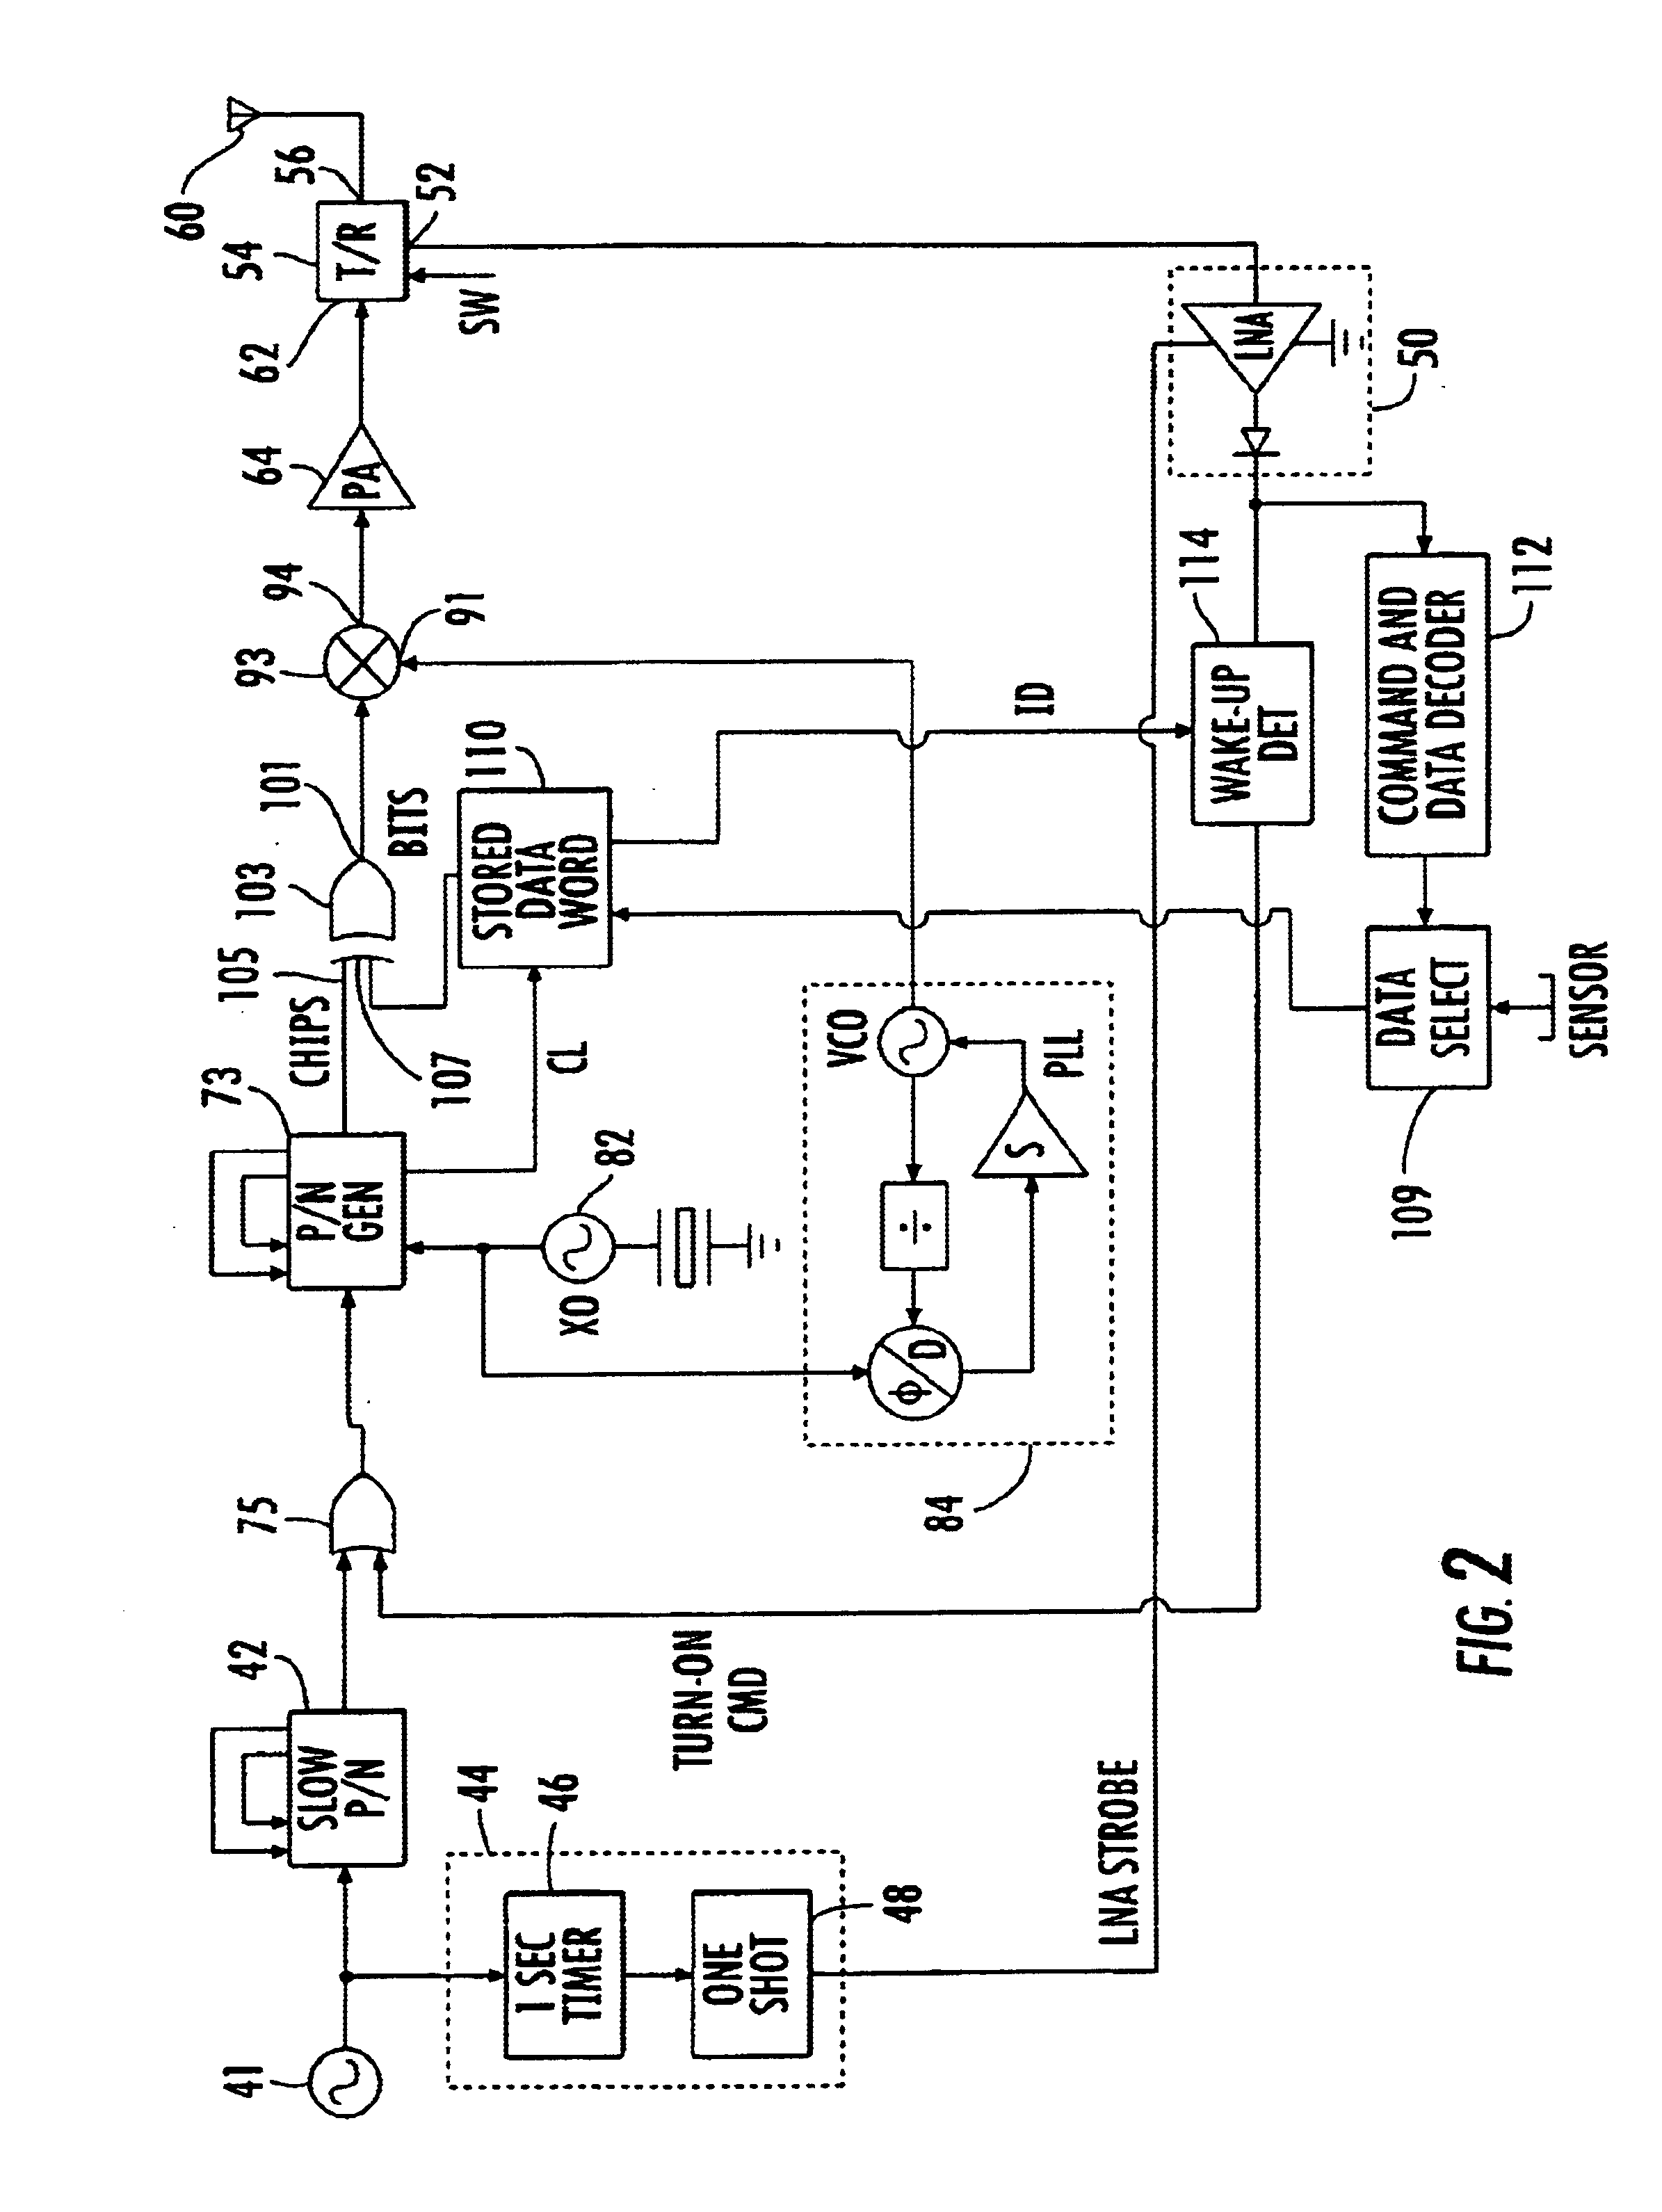 Geolocation system with controllable tags enabled by wireless communications to the tags